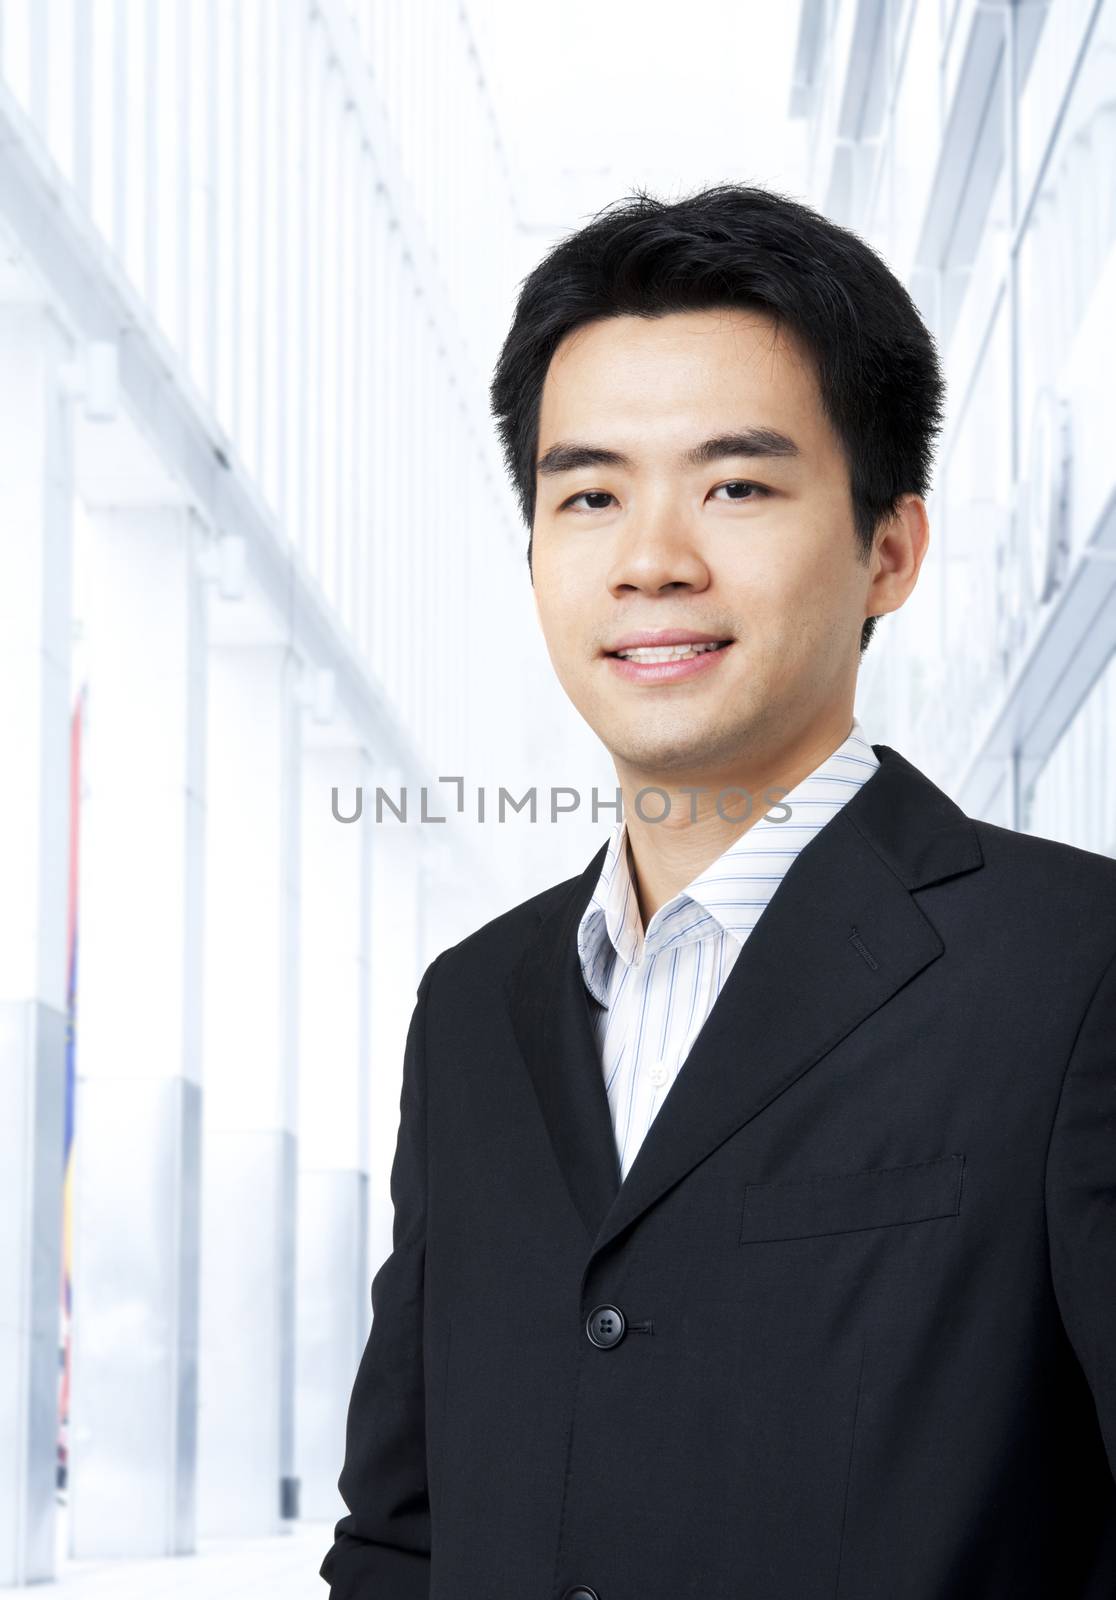 Portrait of young Asian executive in black suit, standing in front of a modern building